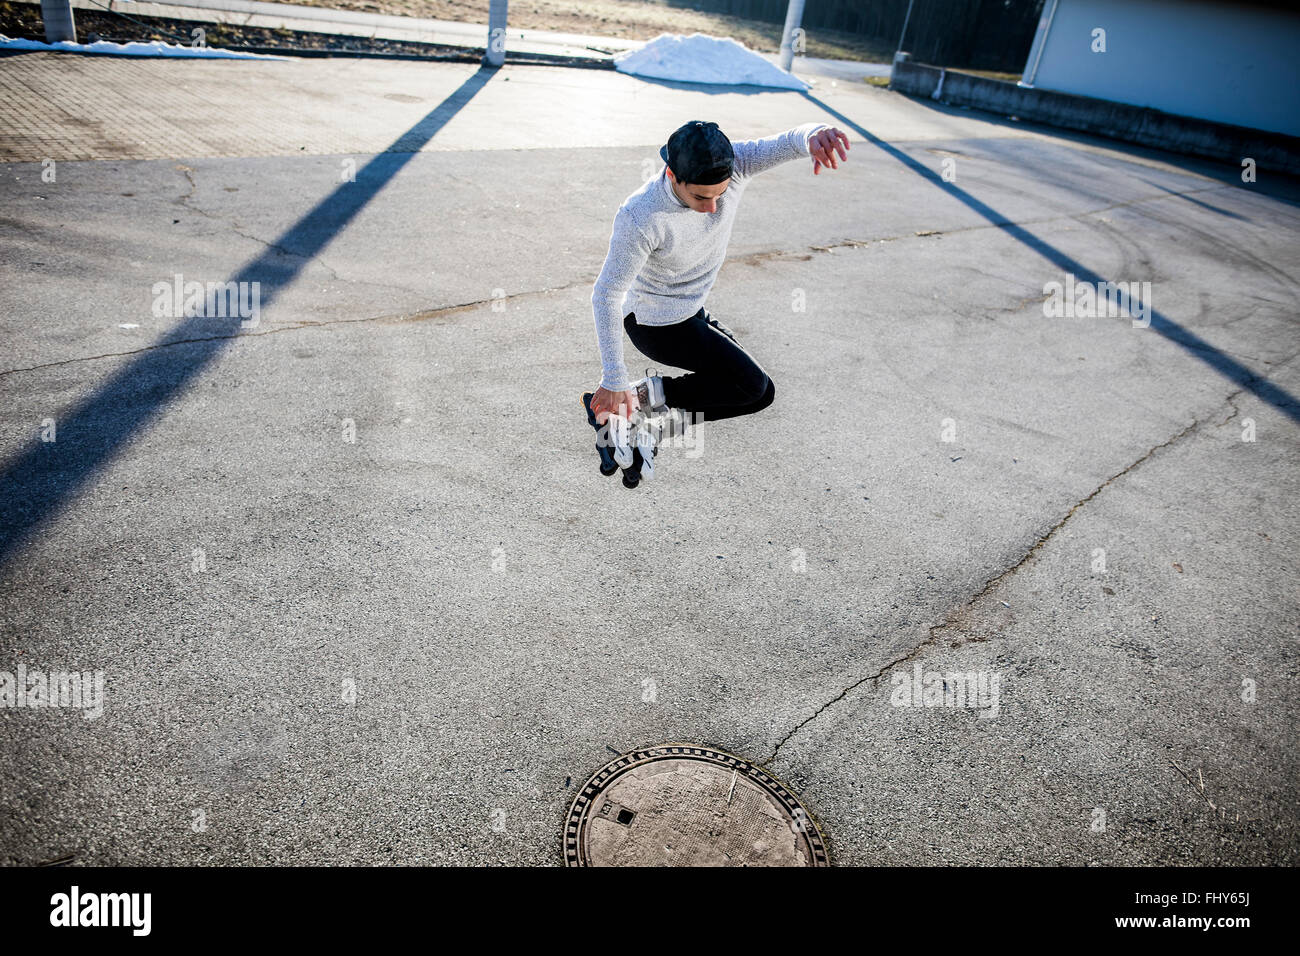 Young man jumping with inlineskates Stock Photo